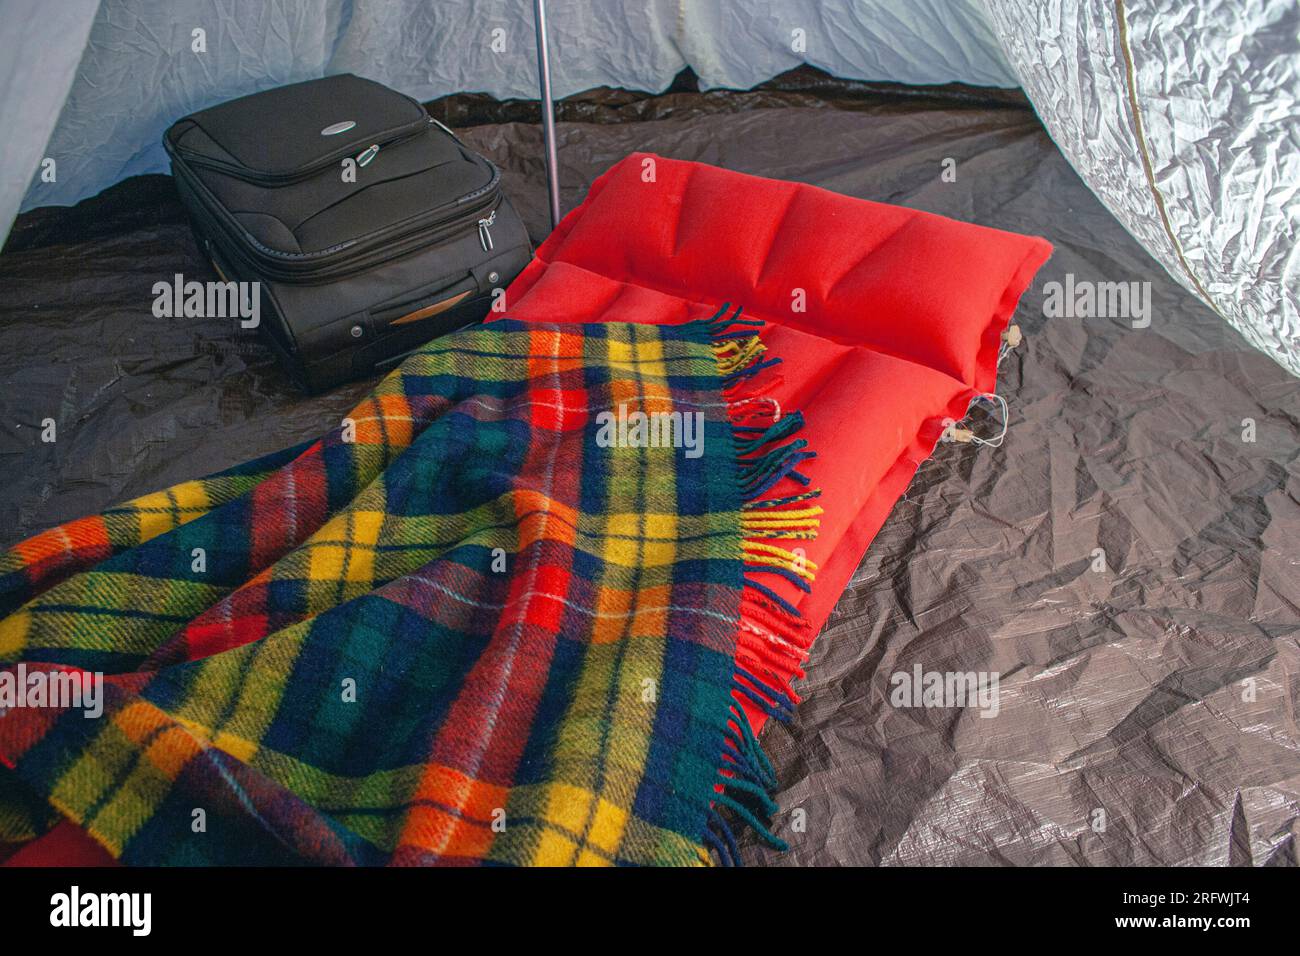 air mattress inside tent at campground. Stock Photo